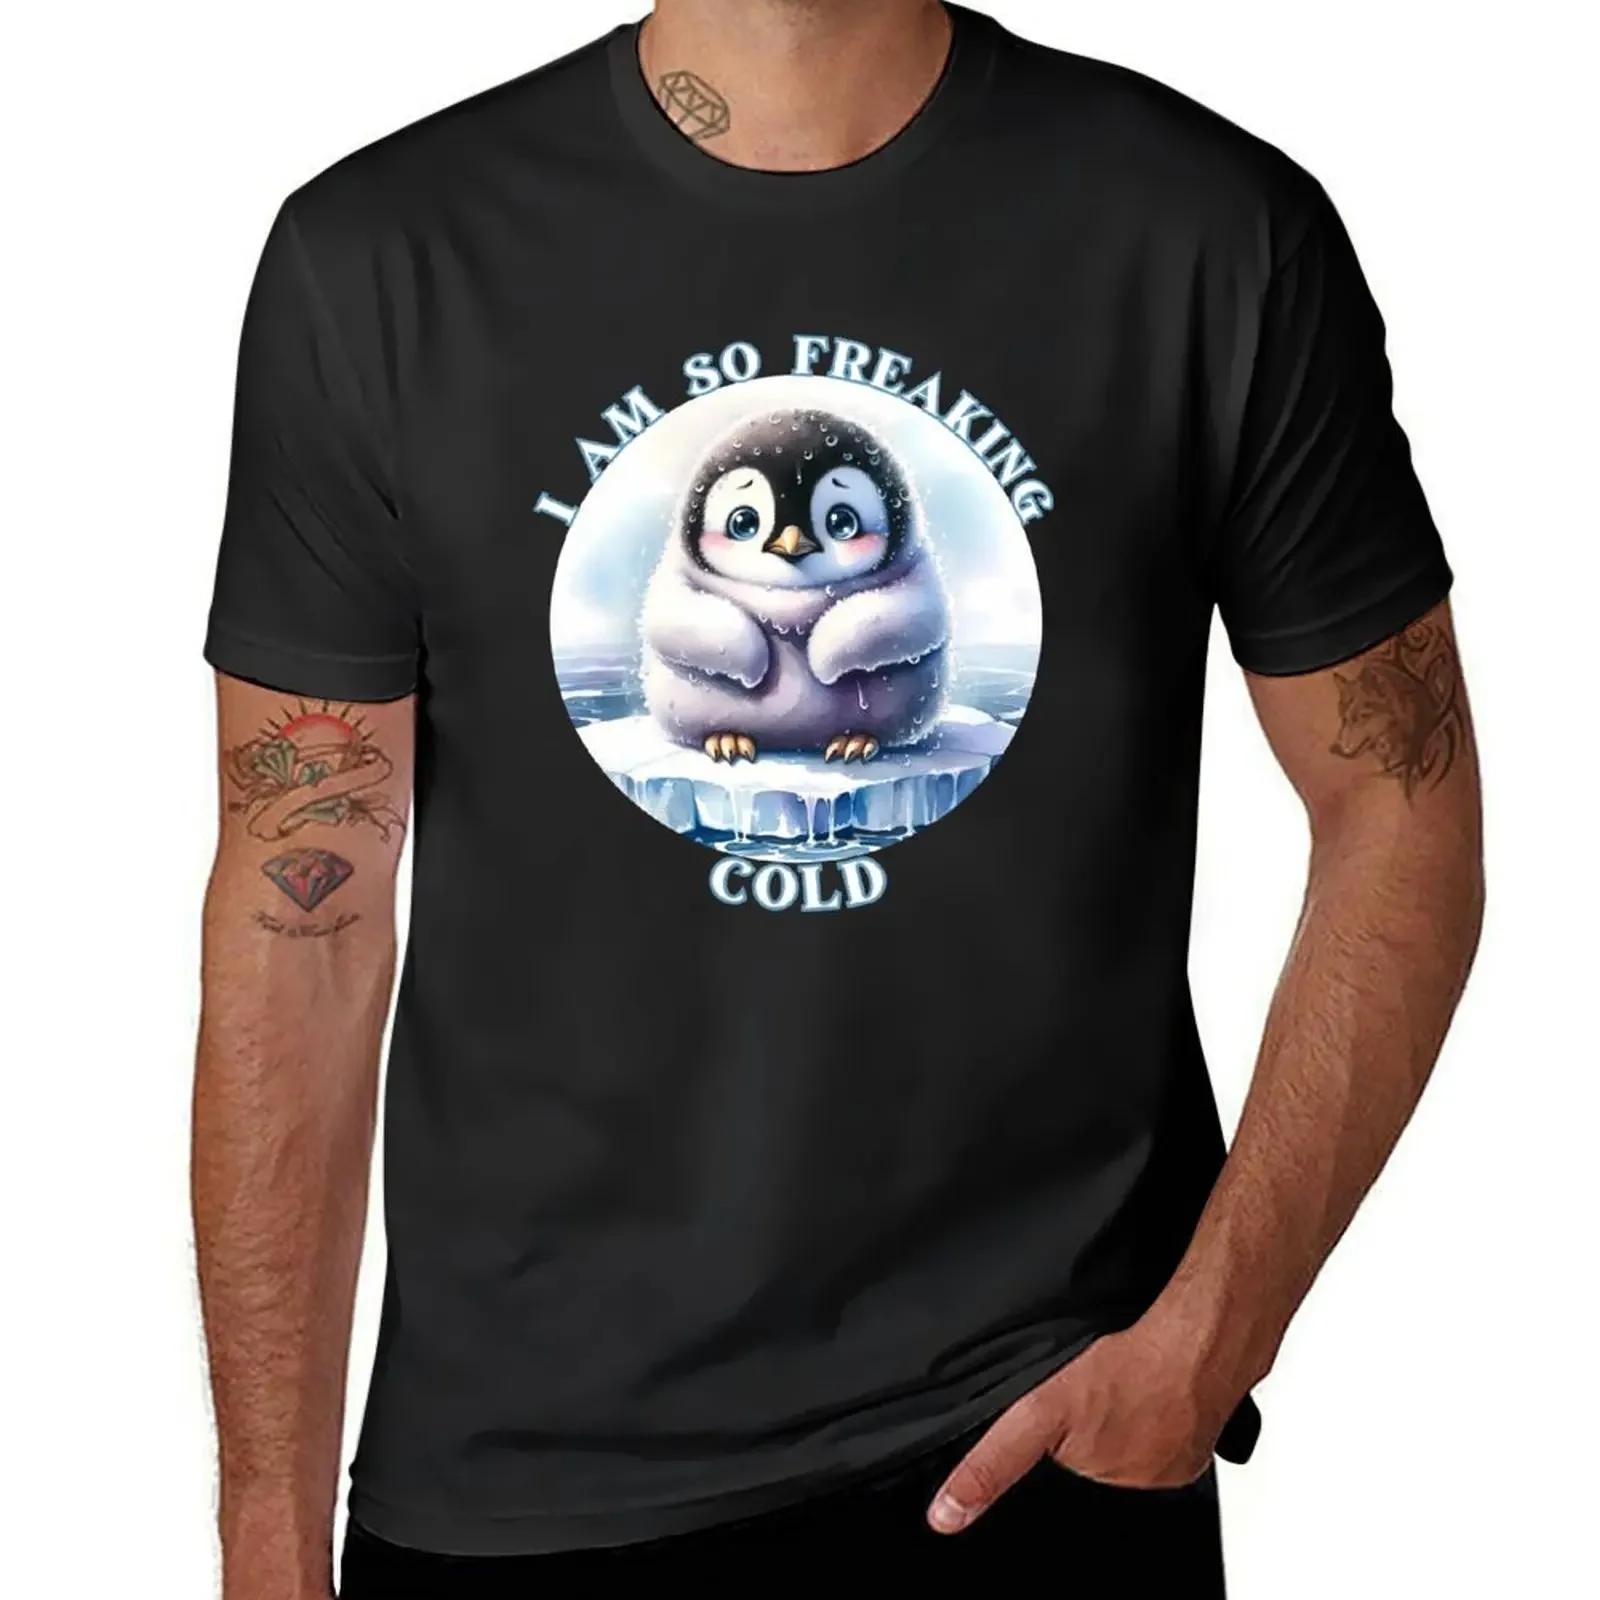 

I Am So Freaking Cold Penguin T-shirt quick drying summer tops plus size tops mens t shirts casual stylish